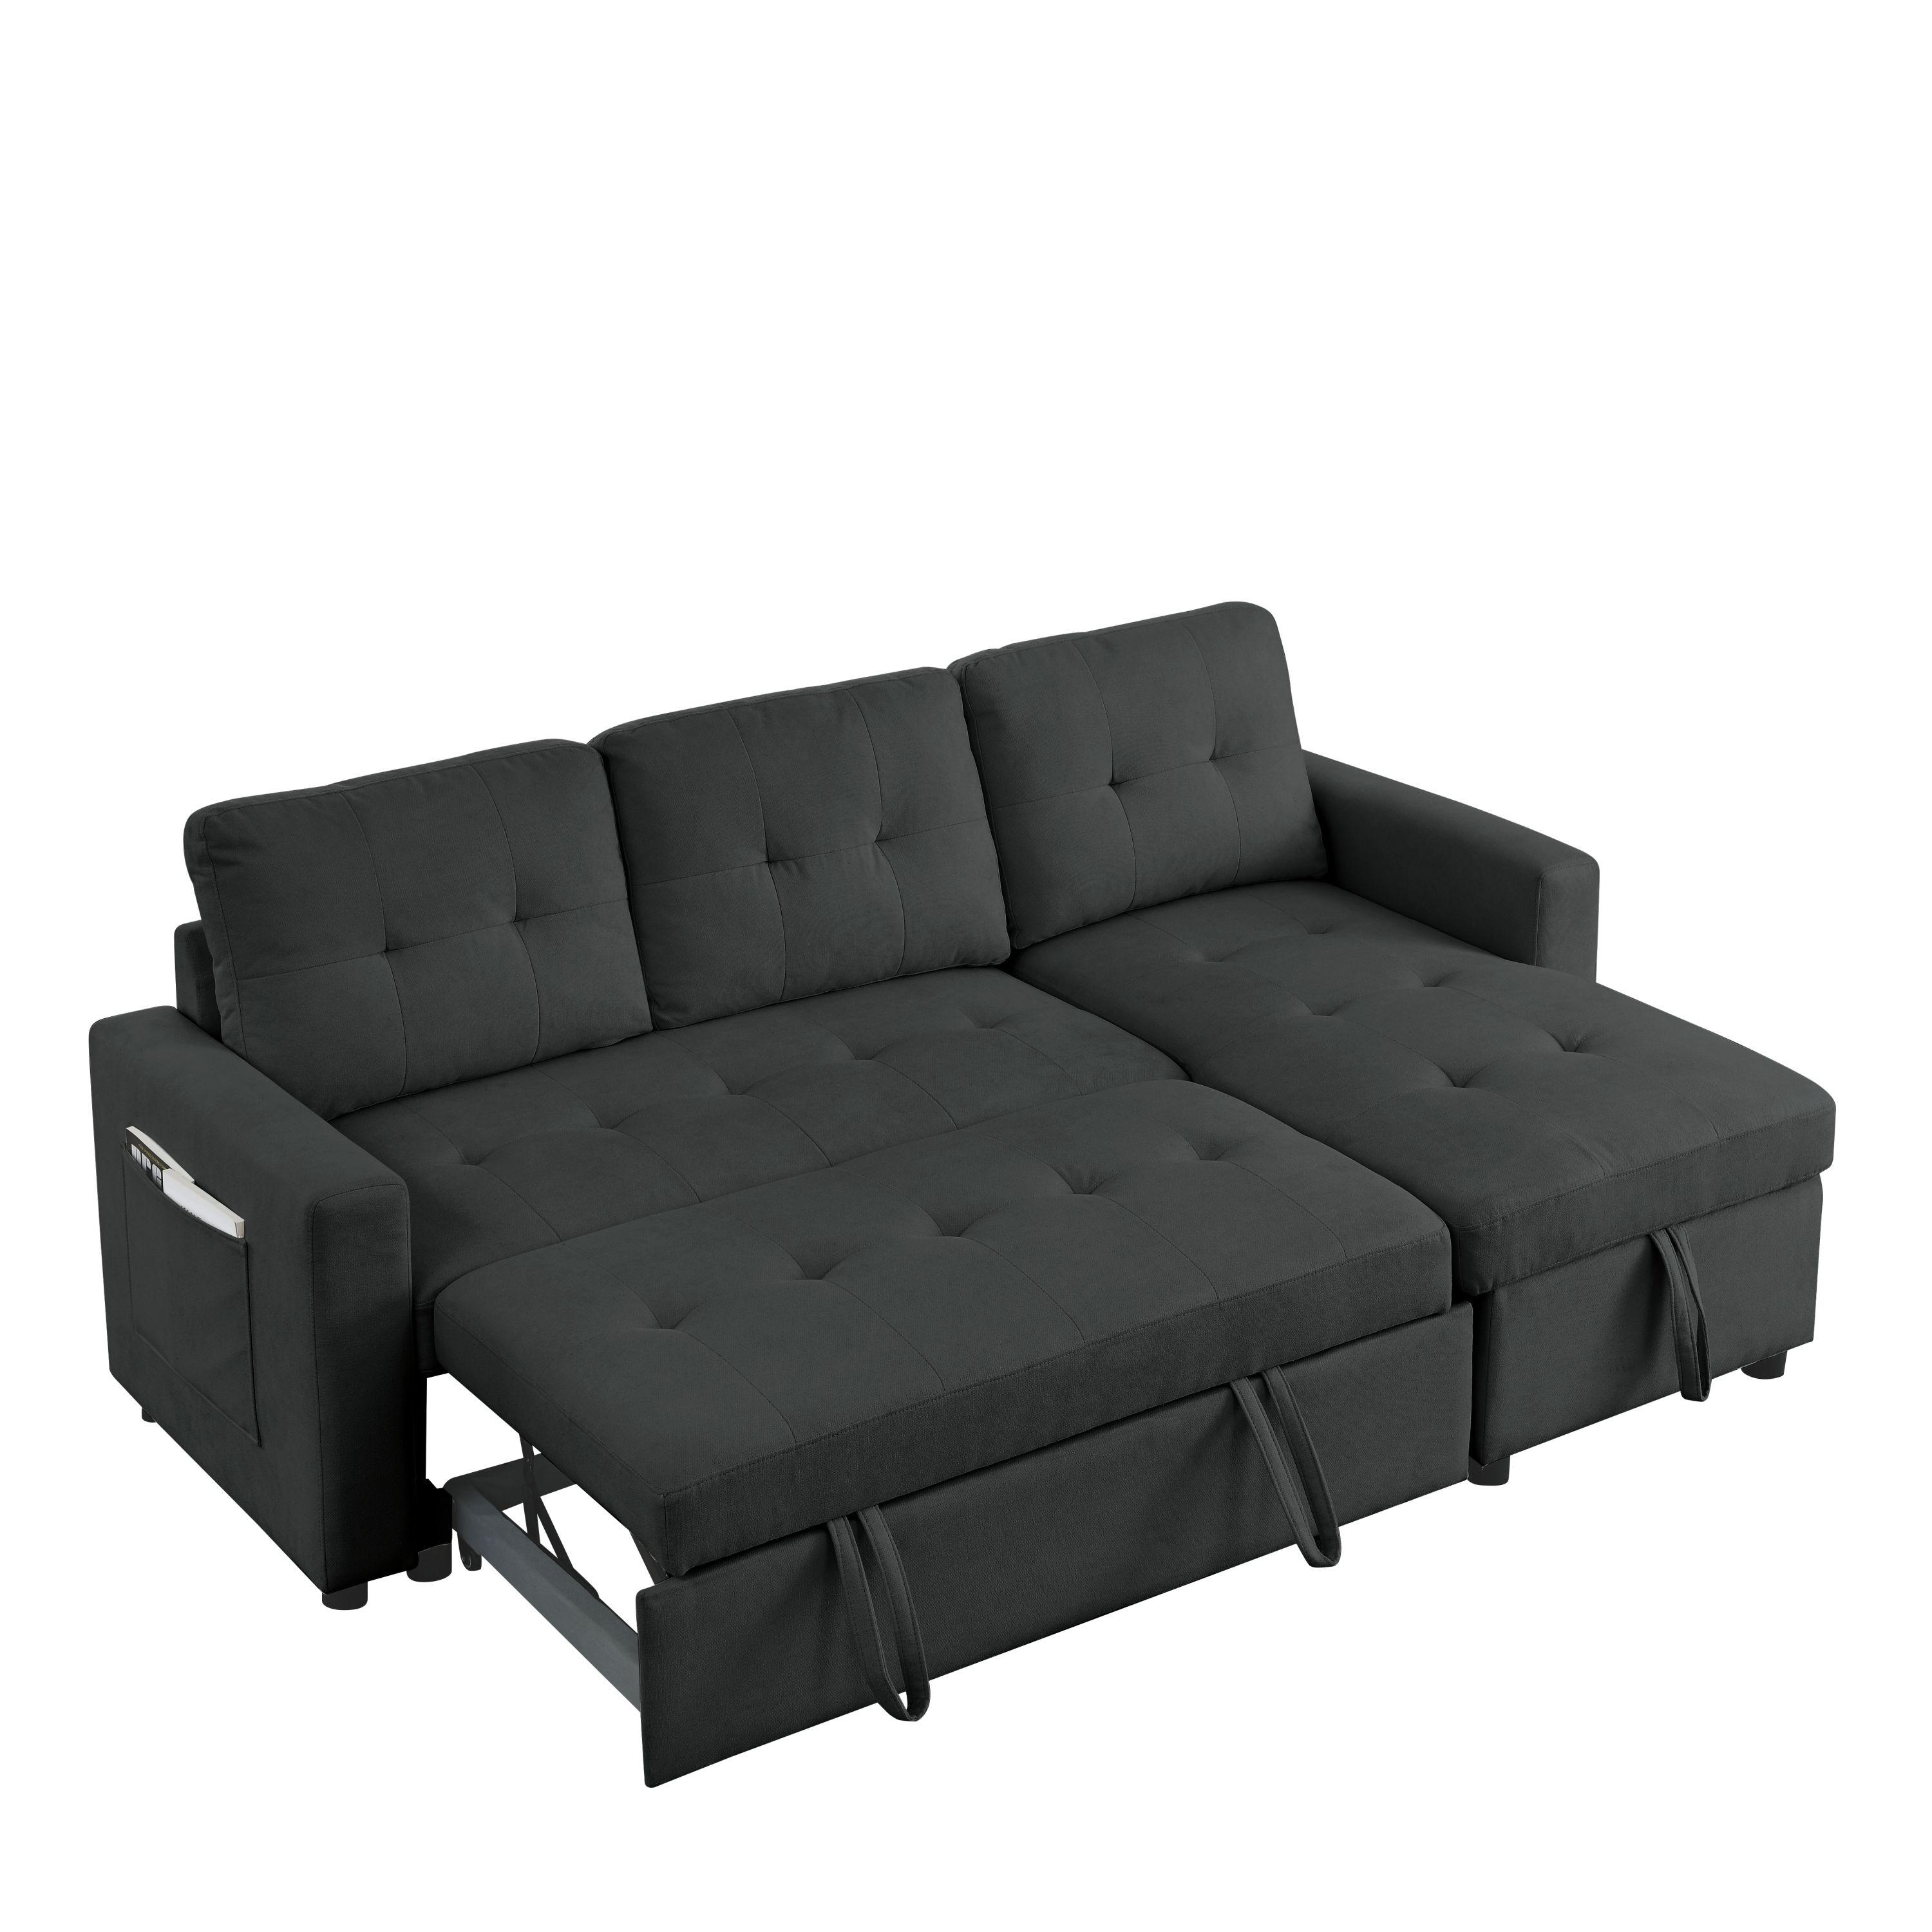 78.5" Sleeper Sectional Sofa w/ Storage - Reversible-Sleeper Sectionals-American Furniture Outlet